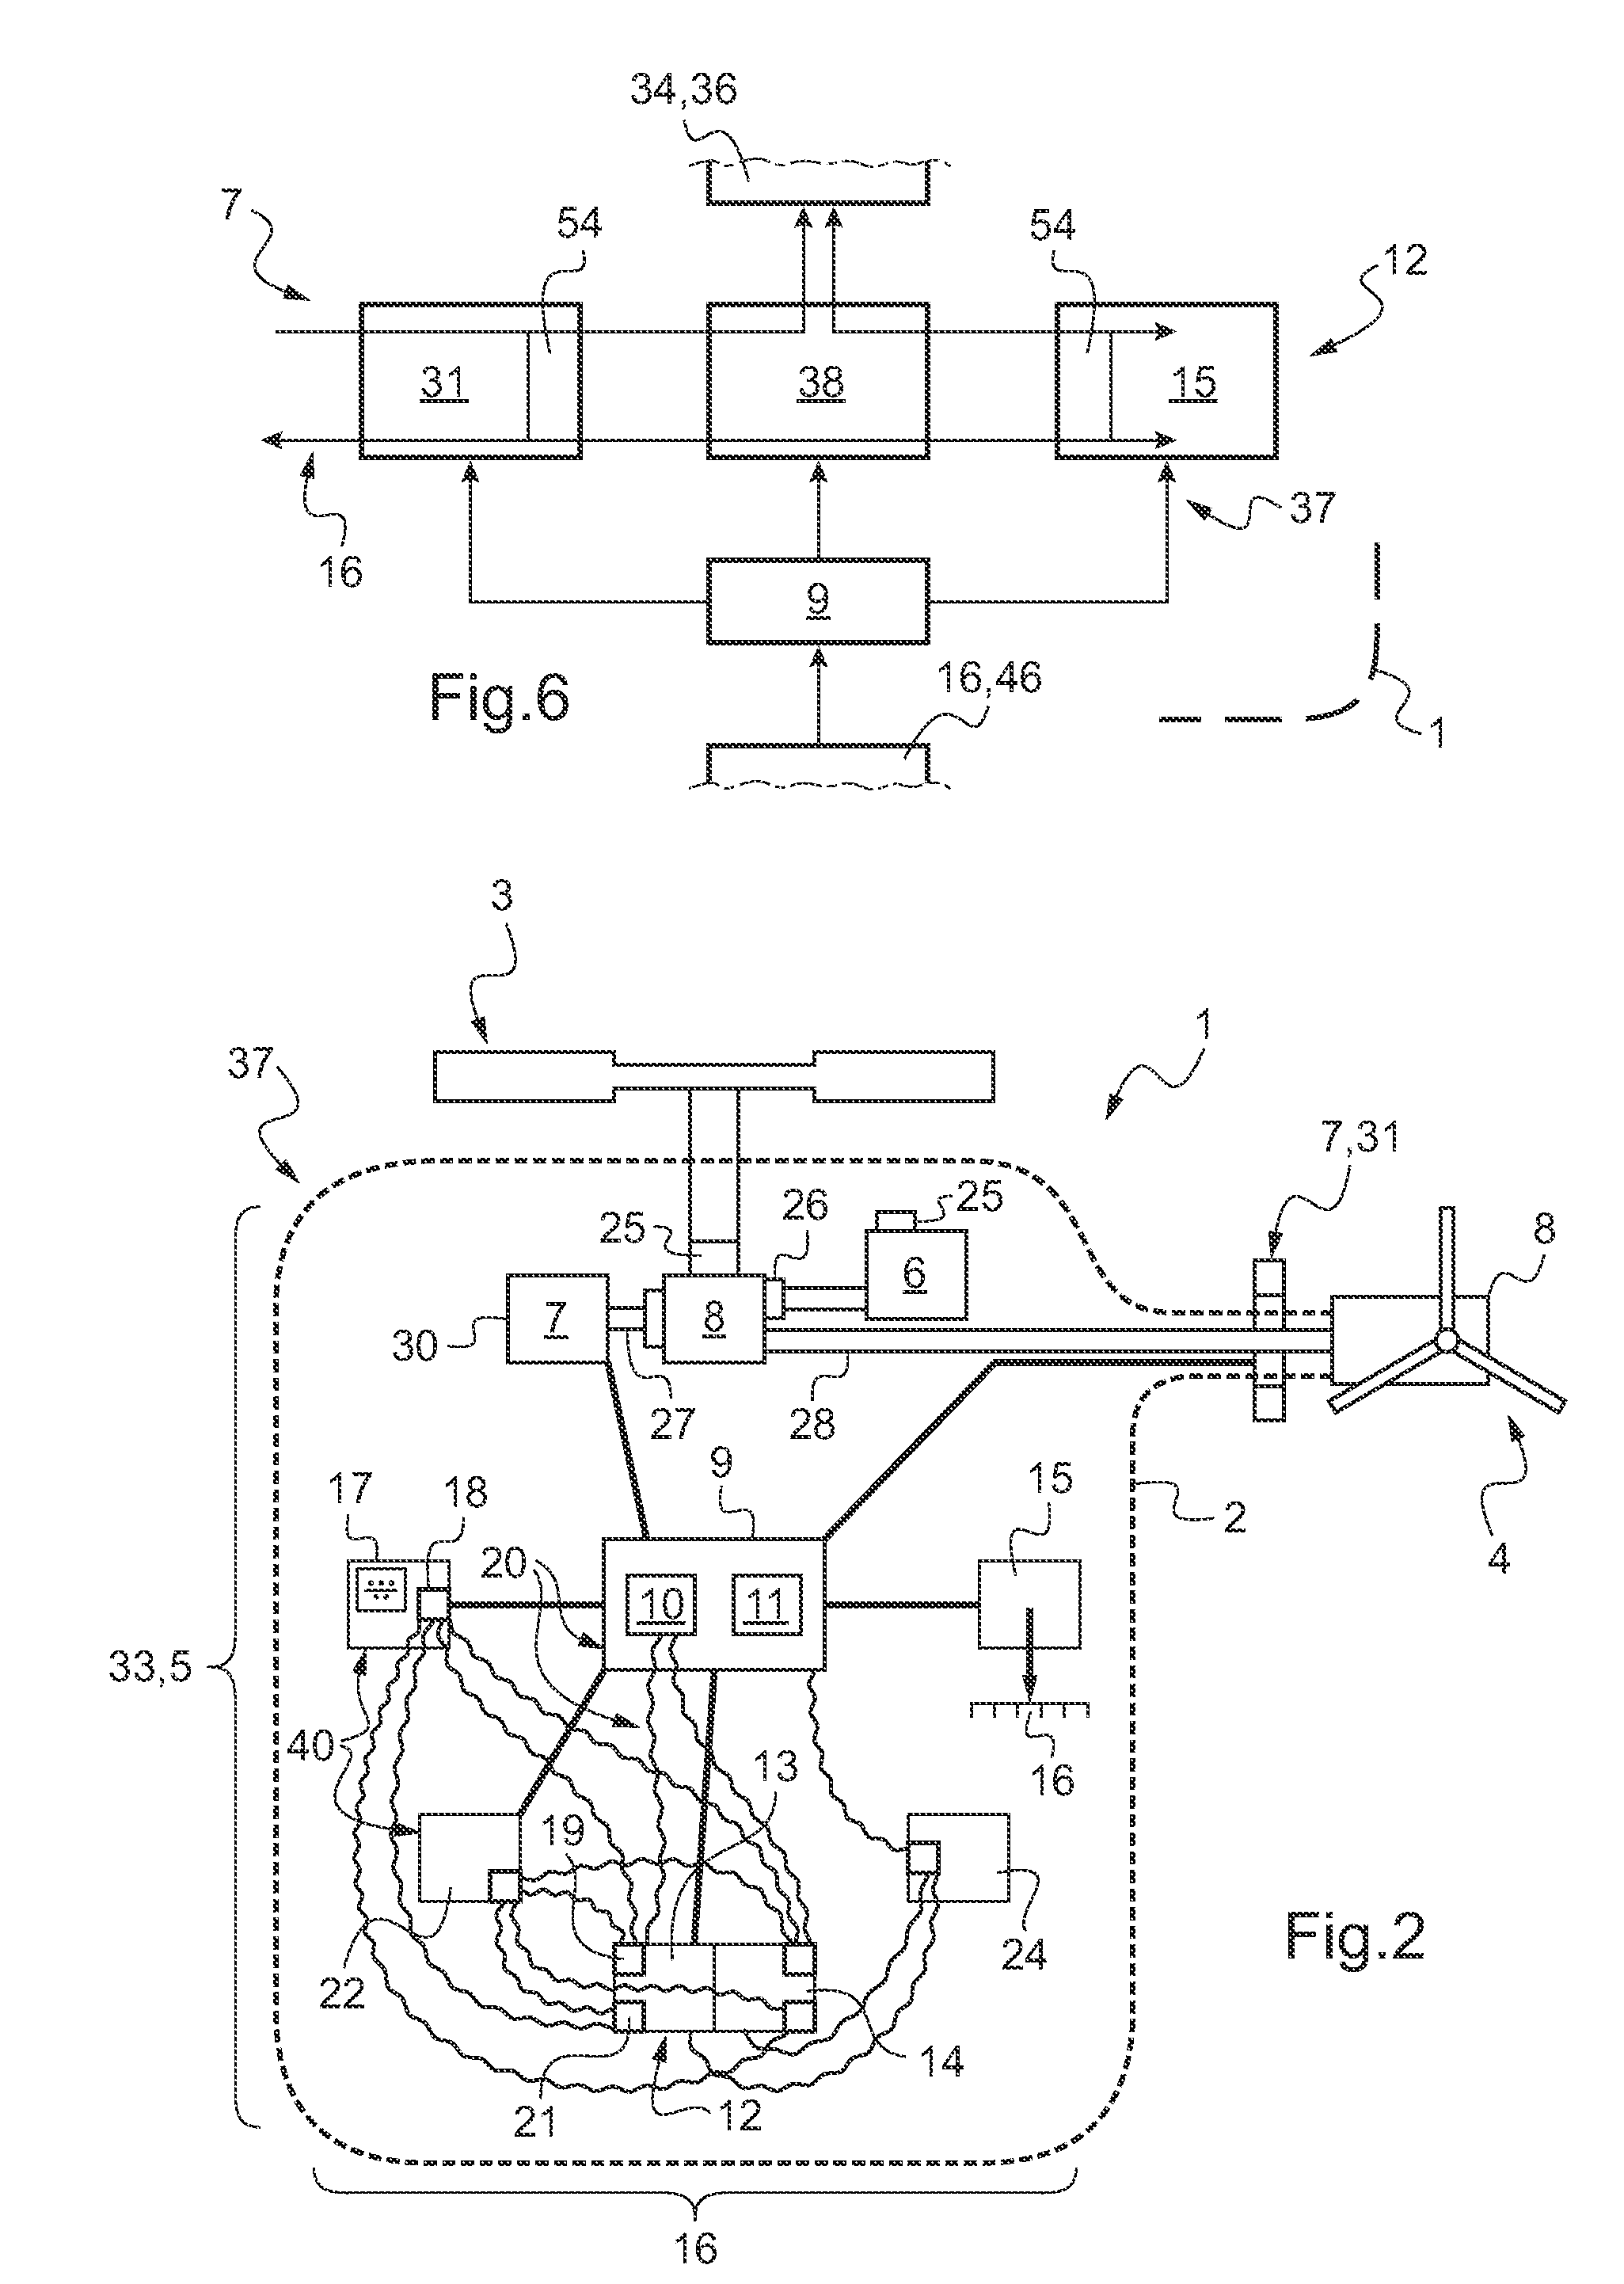 Electrical architecture for a rotary wing aircraft with a hybrid power plant